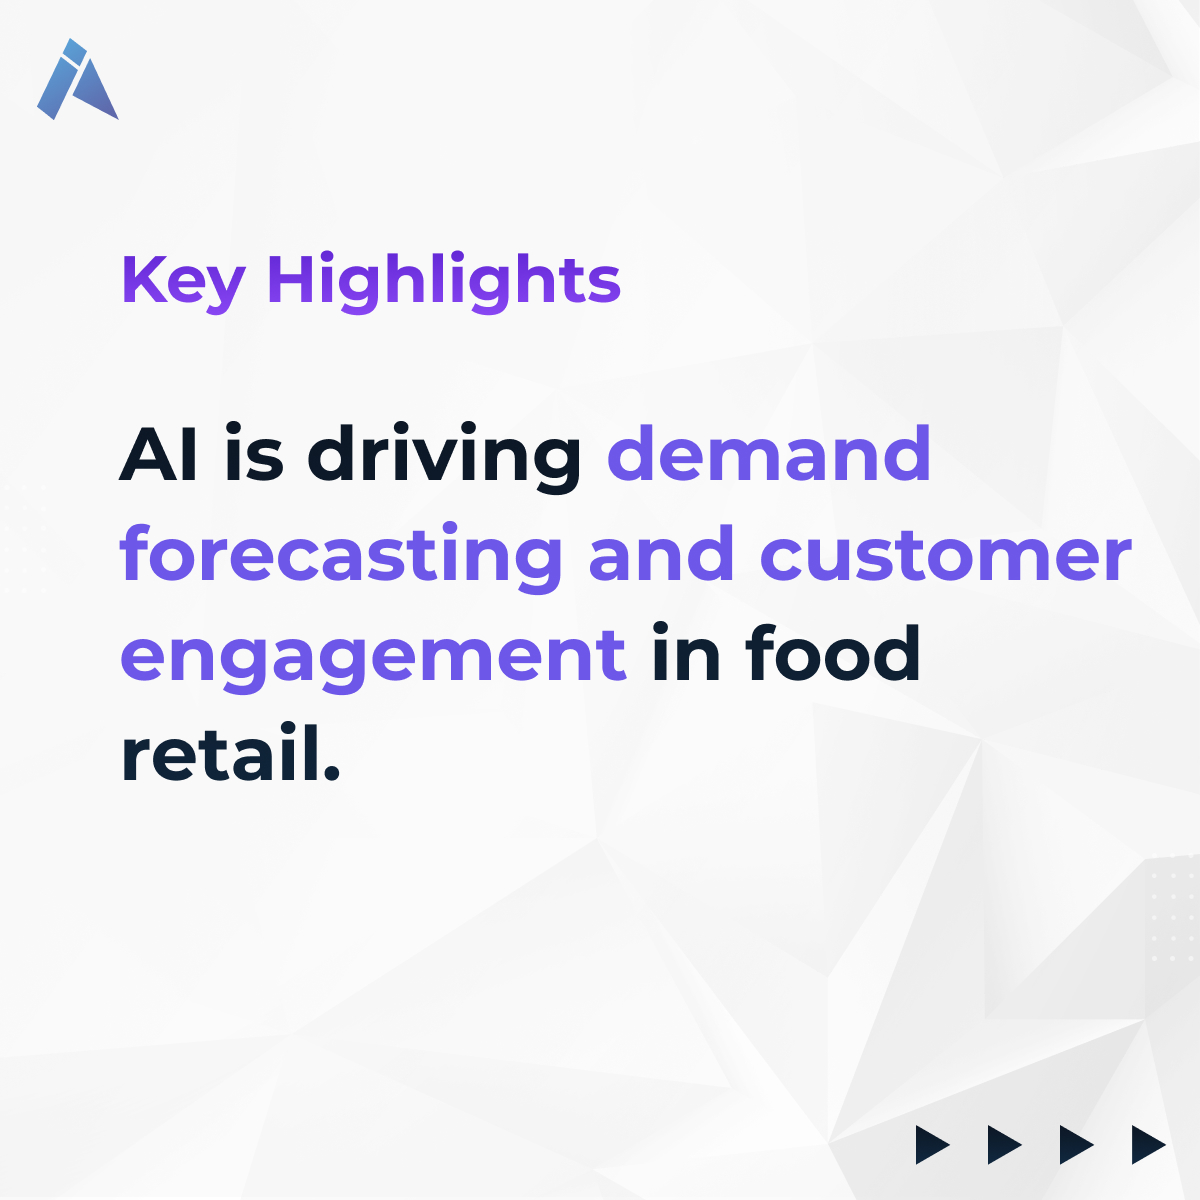 How are food retailers preparing for the 2023 holiday season? With technology of course! Read this featured article in Food Logistics by our CEO, Prashant Agrawal, to learn how. Read on! foodlogistics.com/software-techn…

#foodretail #holidayseason #holidayseason2023 #groceryretail #ai